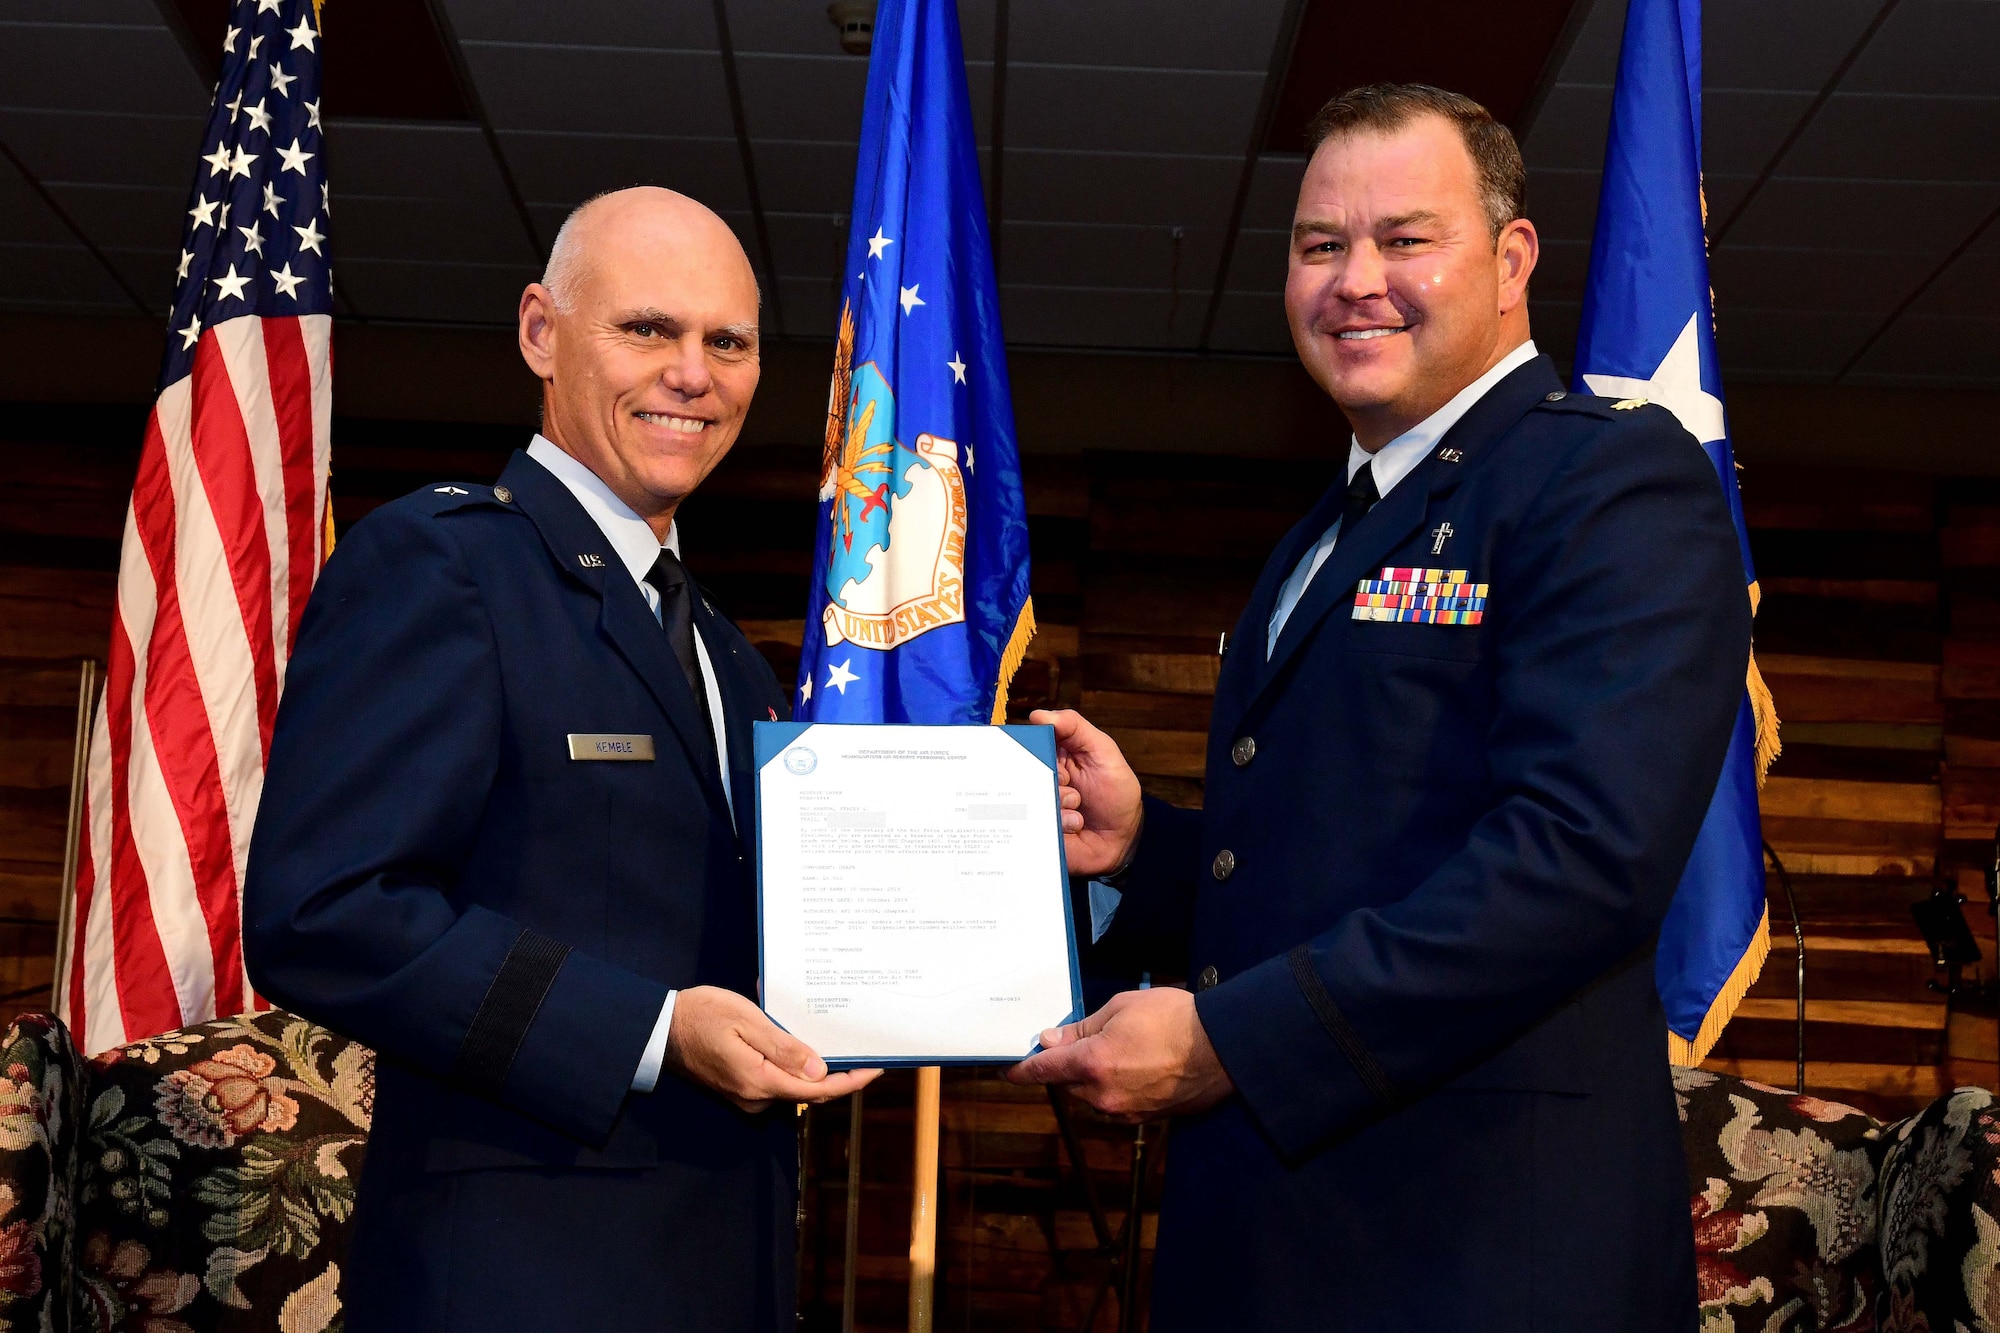 Brig. Gen. Richard Kemble, 94th Airlift commander, left, poses for a photo with Ch. Maj. Stacey Hanson during a promotion ceremony at Hanson's church in Bremen, Georgia on Oct. 20, 2019. Hanson was promoted to lieutenant colonel. (U.S. Air Force photo/Tech. Sgt. Andrew Park)